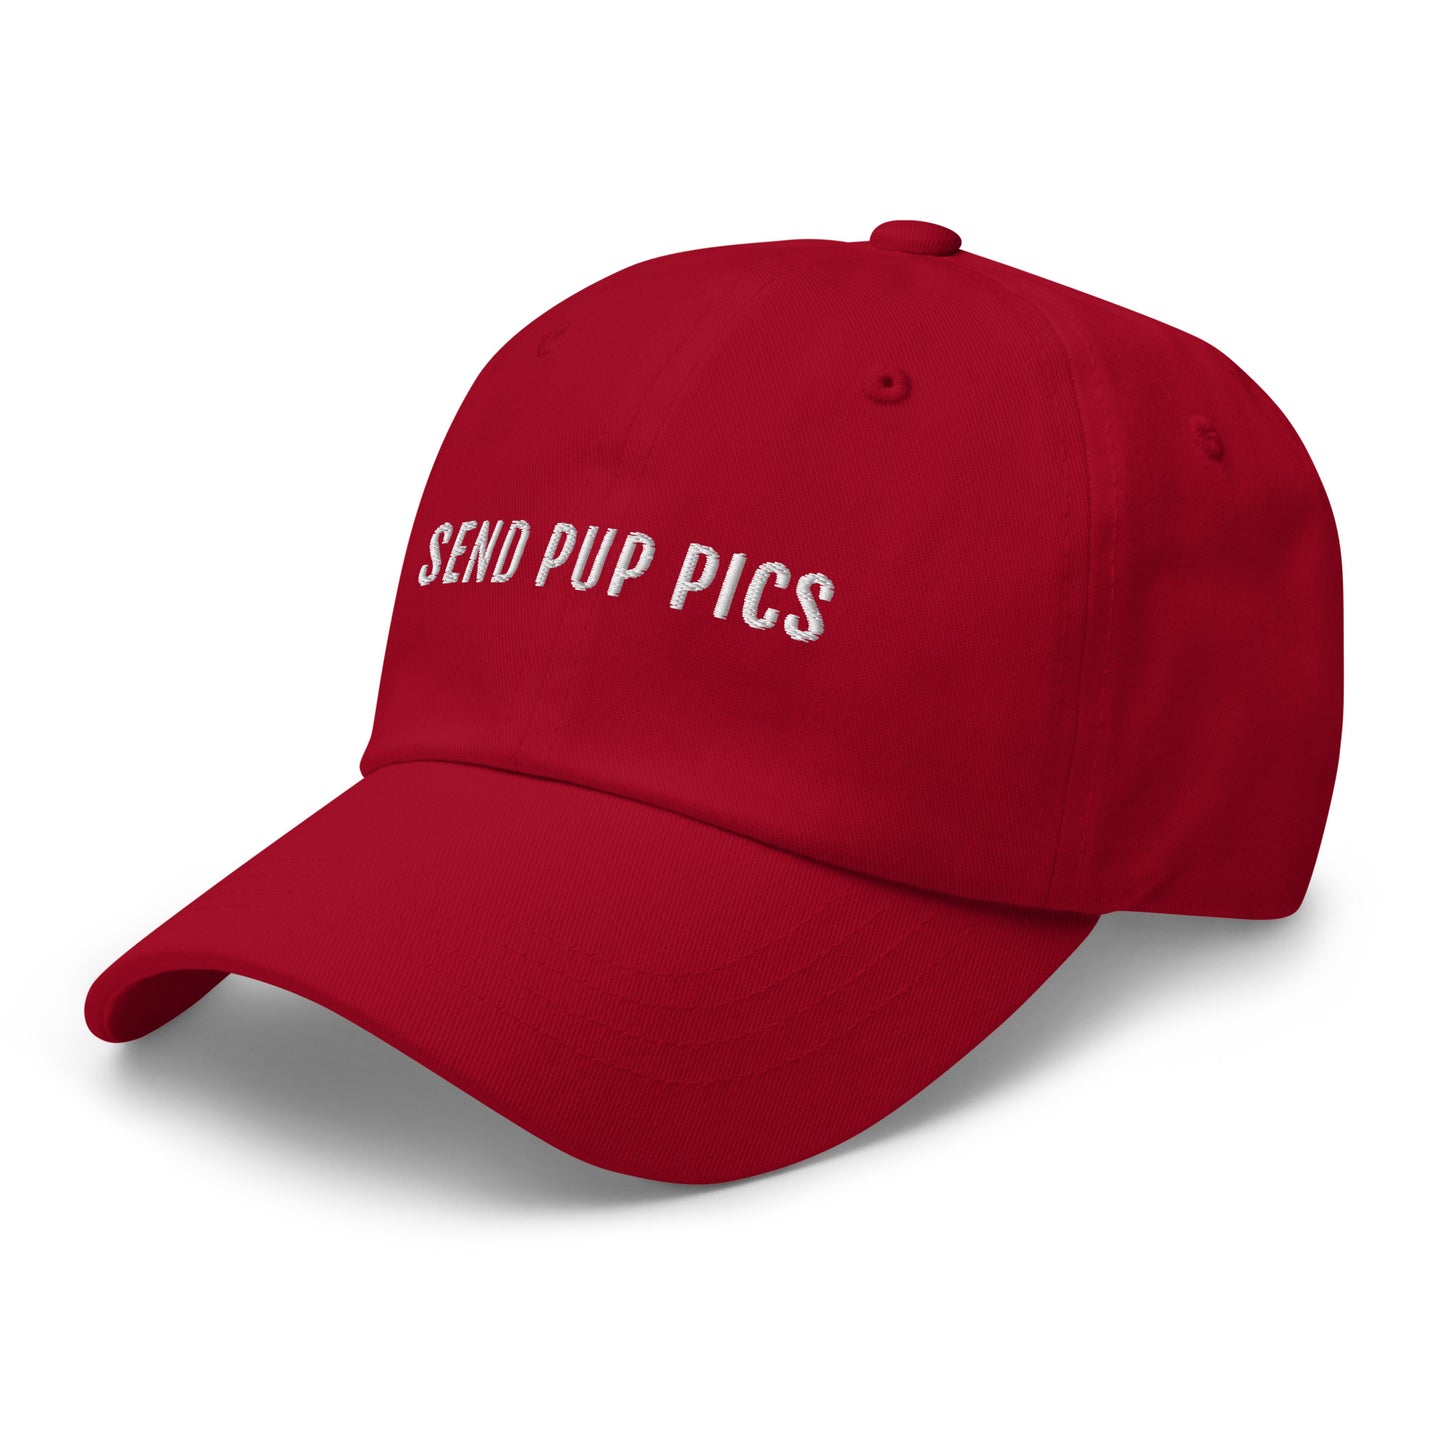 send pup pics red hat for pet dad